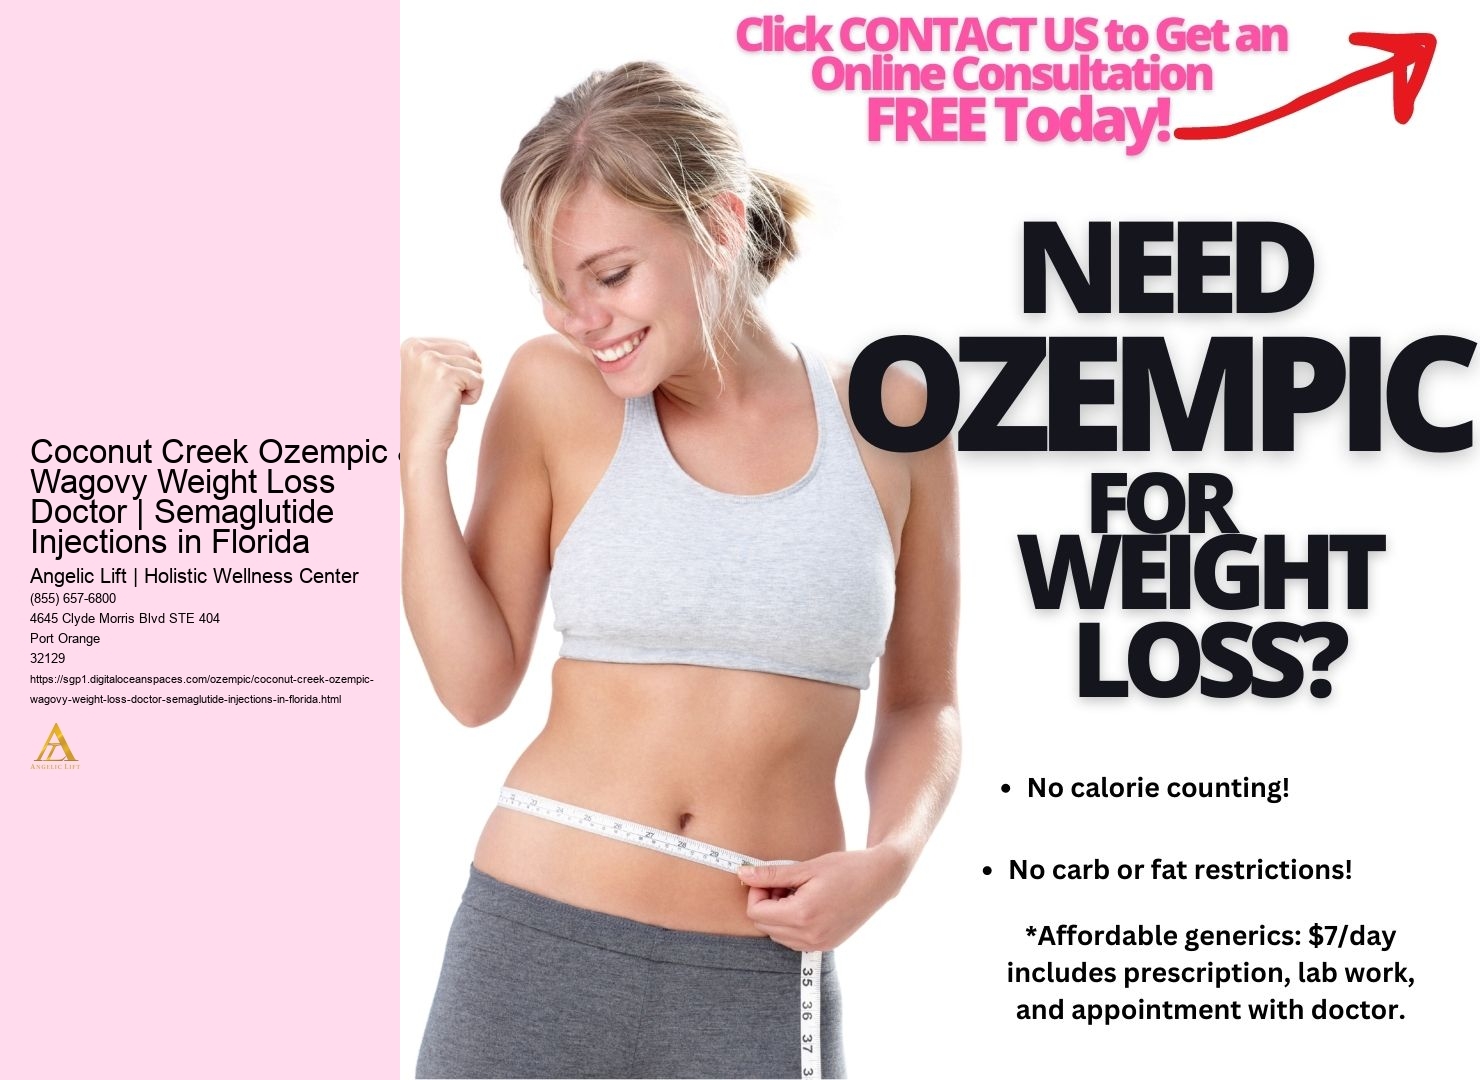 Coconut Creek Ozempic & Wagovy Weight Loss Doctor | Semaglutide Injections in Florida